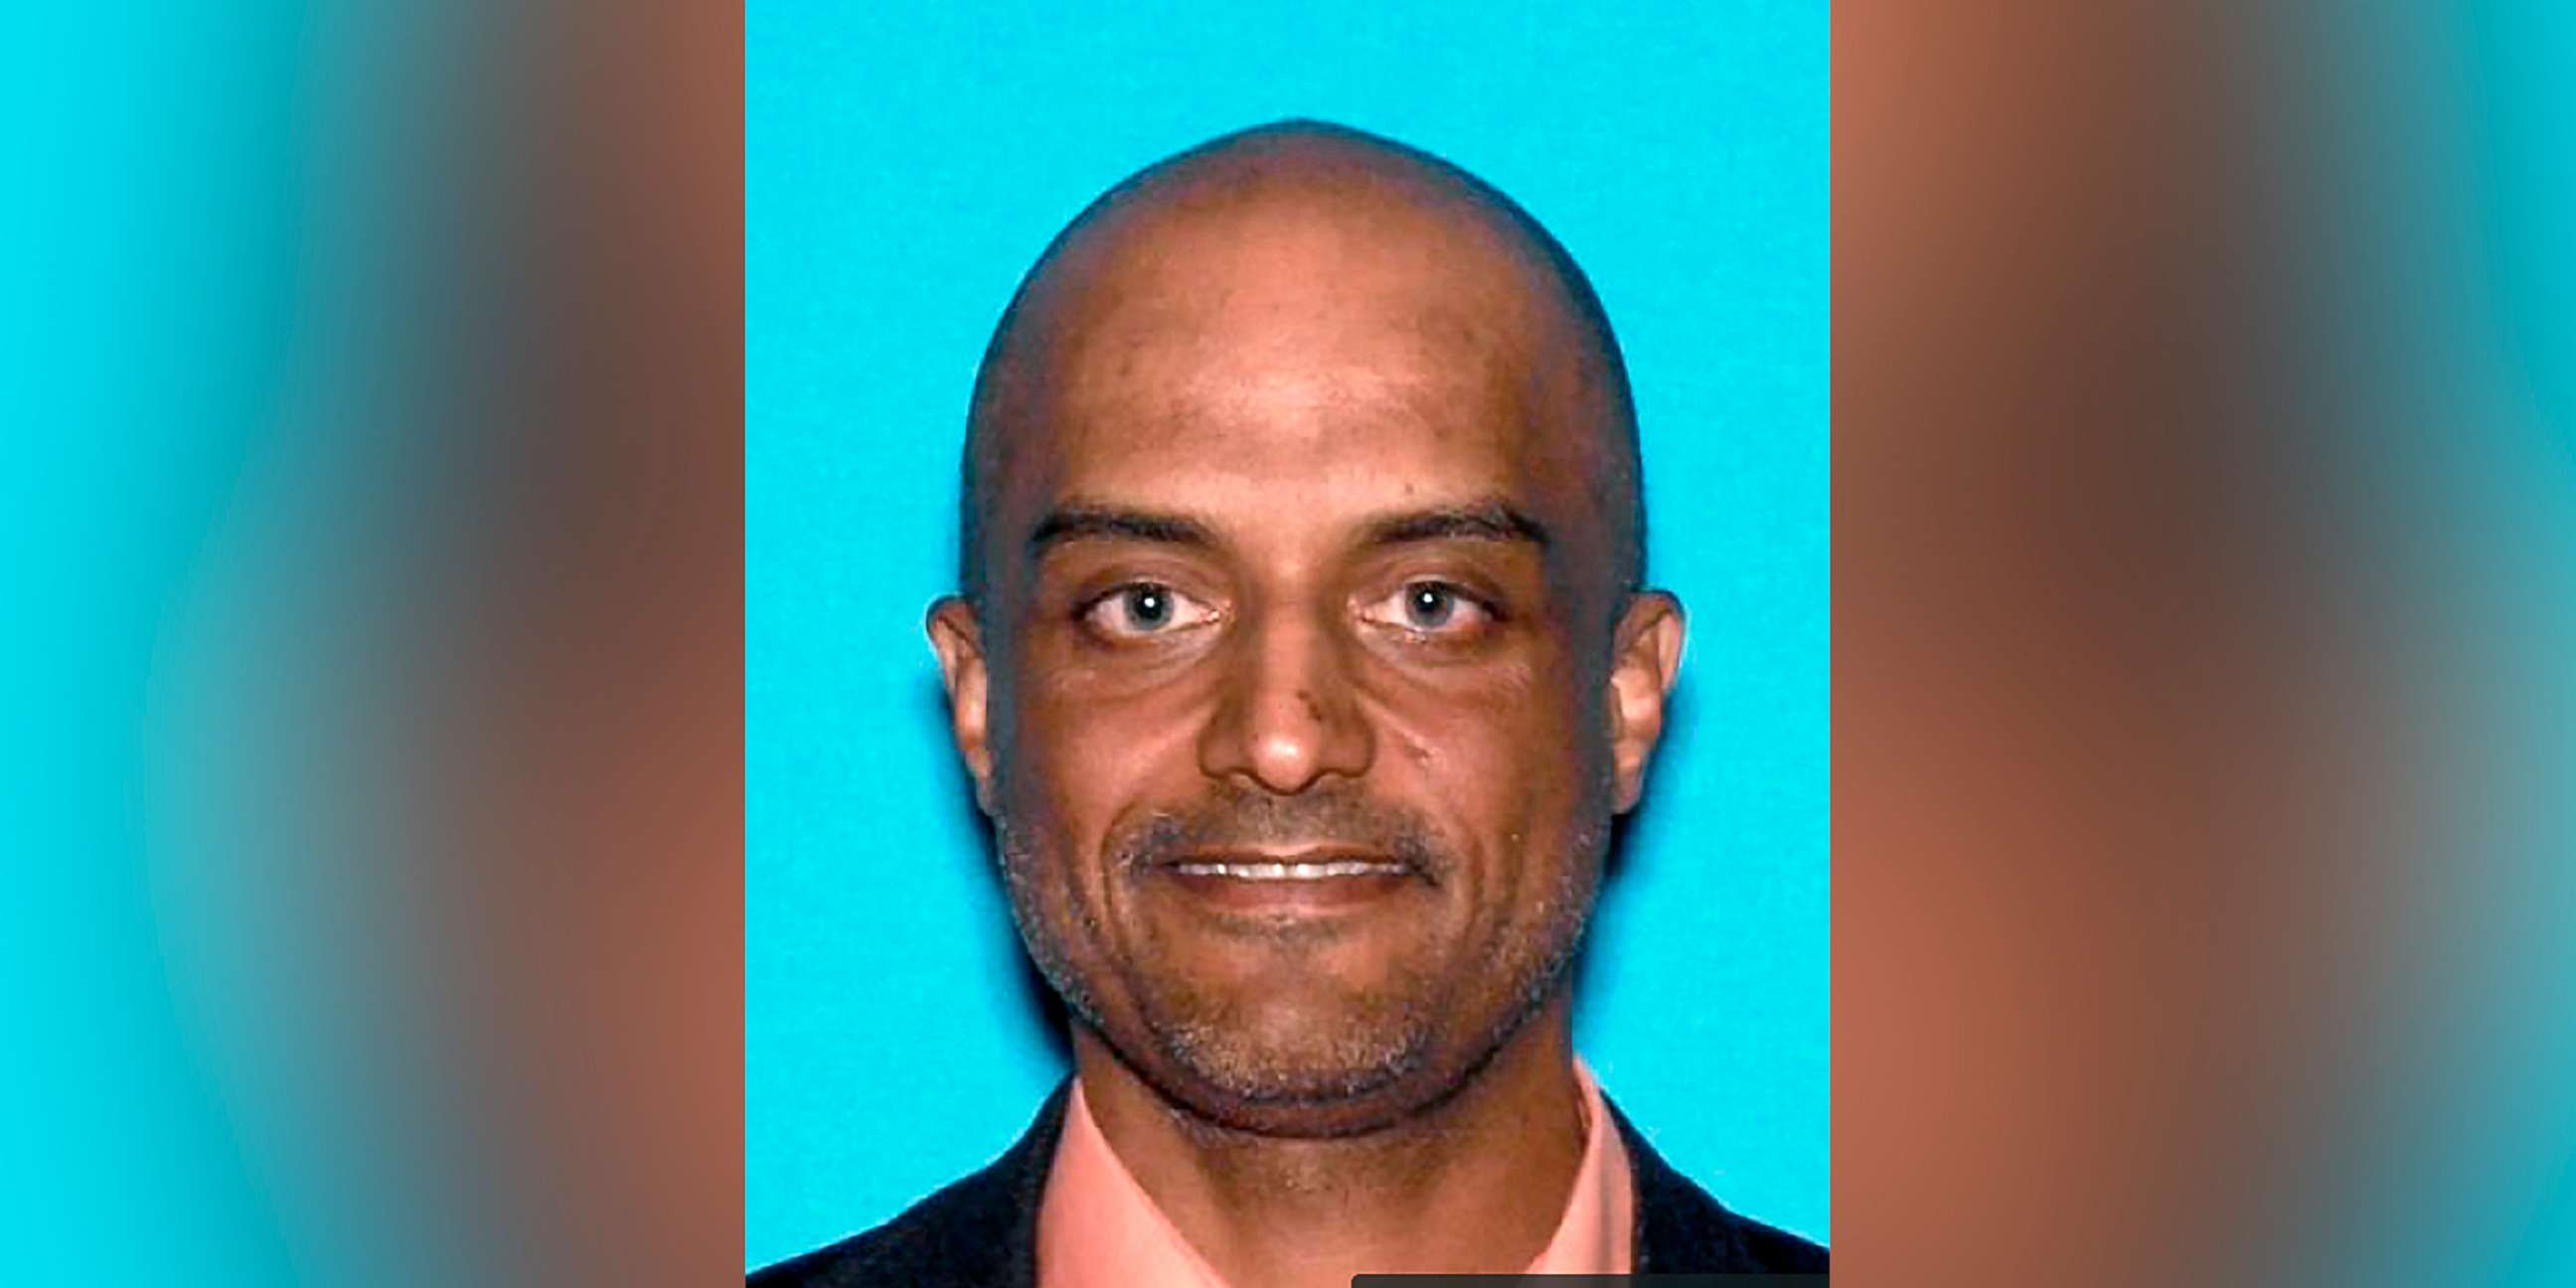 PHOTO: Tushar Atre in an undated photo provided by the Santa Cruz County Sheriff's Office. Authorities say the 50-year-old owner of a digital marketing company was abducted on Oct. 1, 2019, from his home in Santa Cruz, Calif.